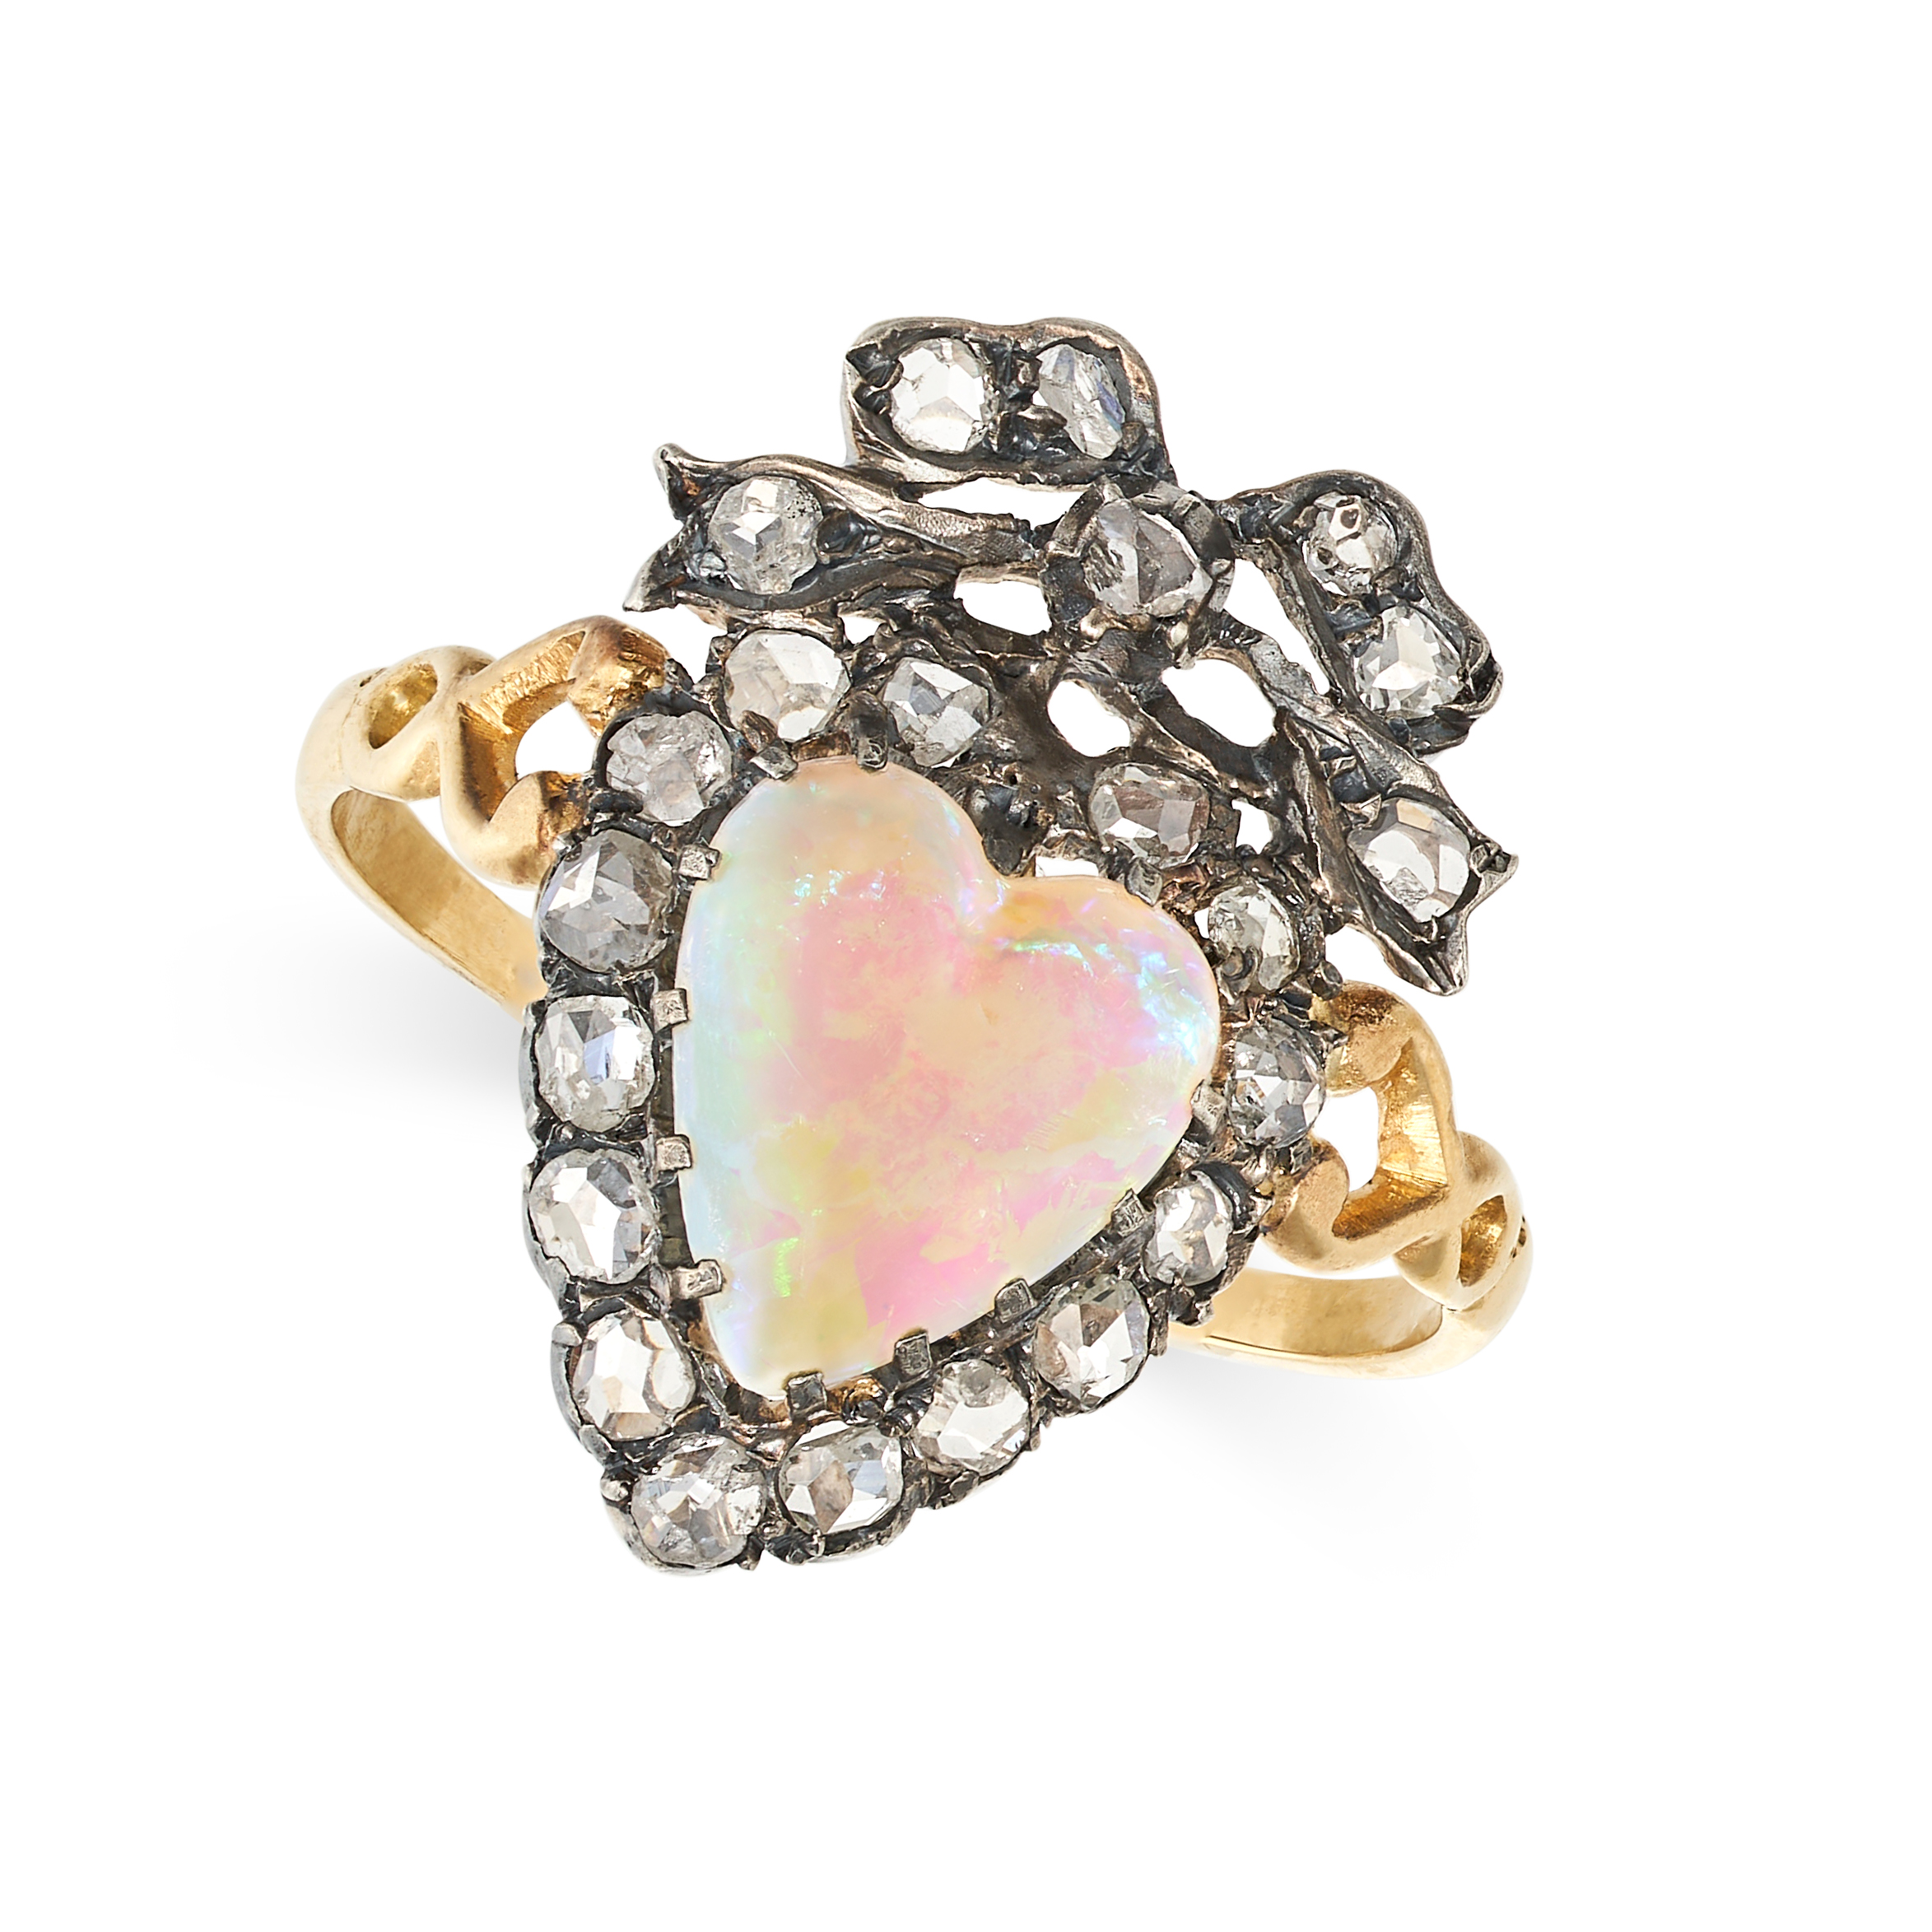 AN OPAL AND DIAMOND SWEETHEART RING in yellow gold and silver, set with a heart shaped cabochon o...